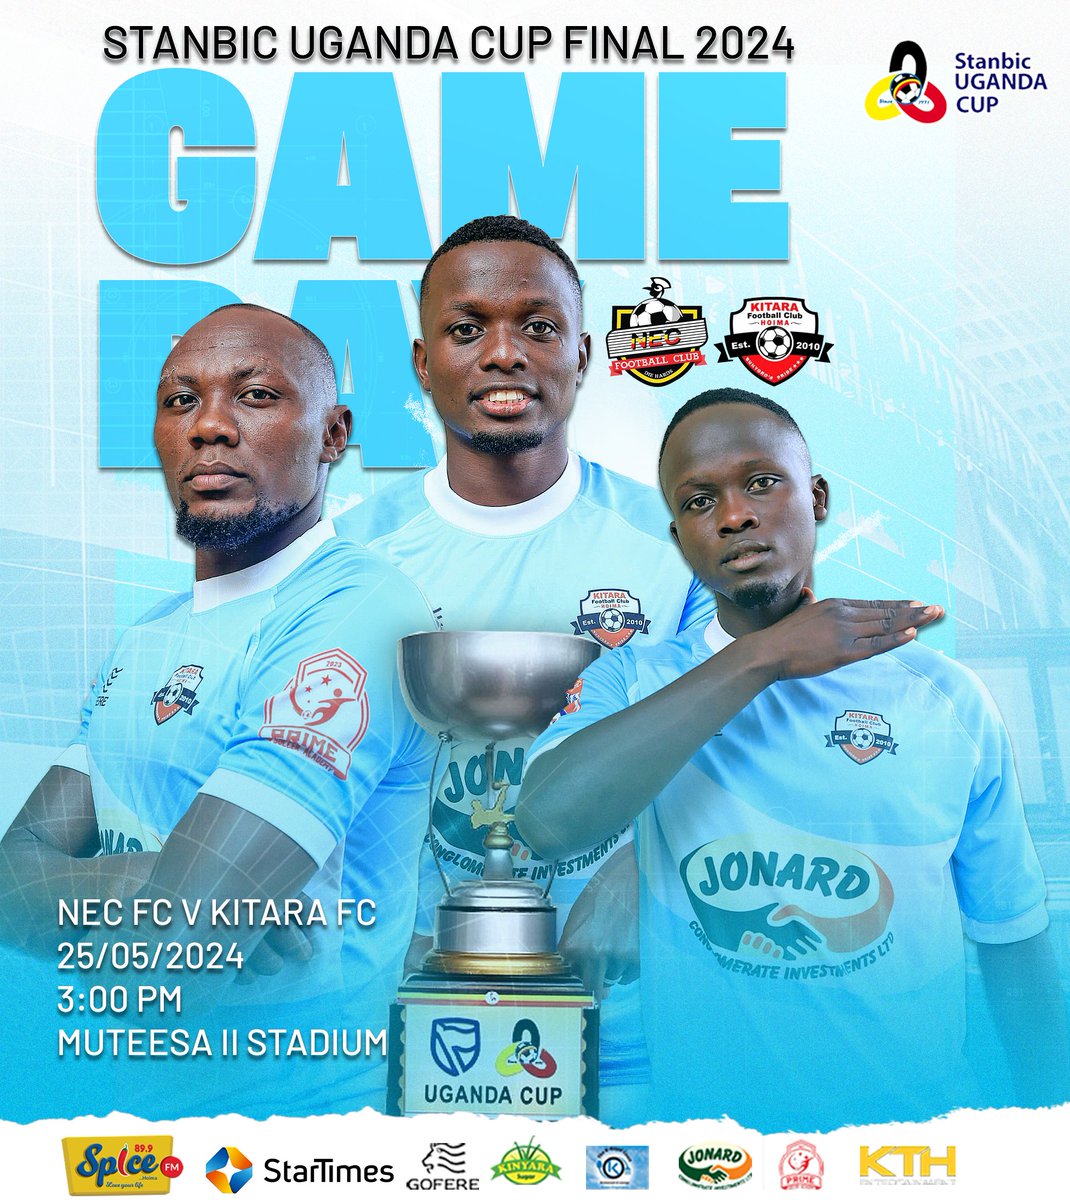 𝗜𝗧'𝗦 𝗧𝗢𝗗𝗔𝗬 𝗢𝗥 𝗡𝗘𝗩𝗘𝗥 !! 🔥 The defining moment we've been waiting for is finally here.✌️ Let's all be at Wankulukuku to cheer the Royals in the grand finale of the #StanbicUgandaCup #NECKIT | #50thEdition #KitaraUpdates | #PrideOfBunyoro